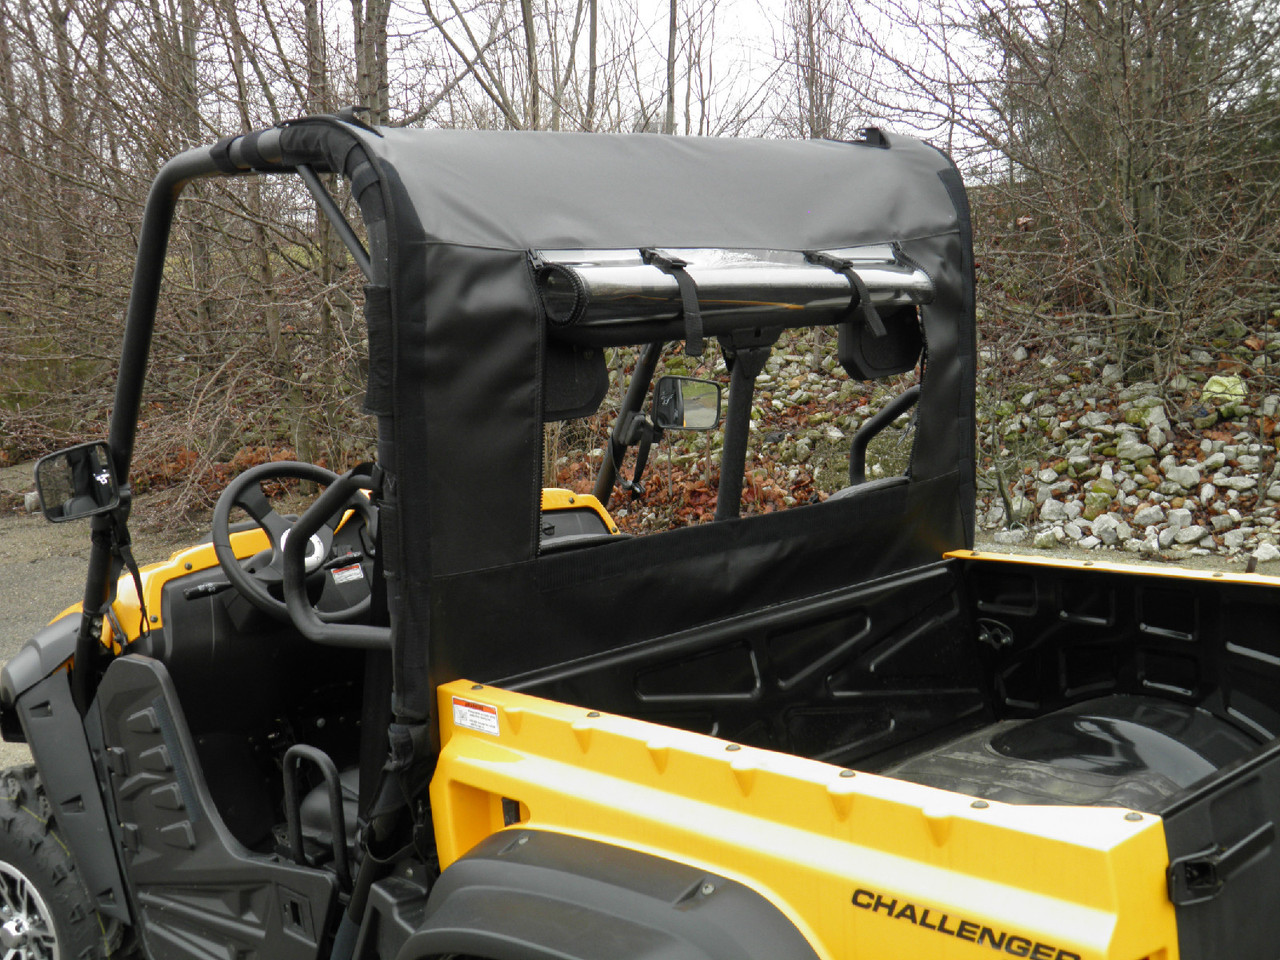 3 Star side x side Cub Cadet Challenger 500/700 full cab enclosure rear angle view close up